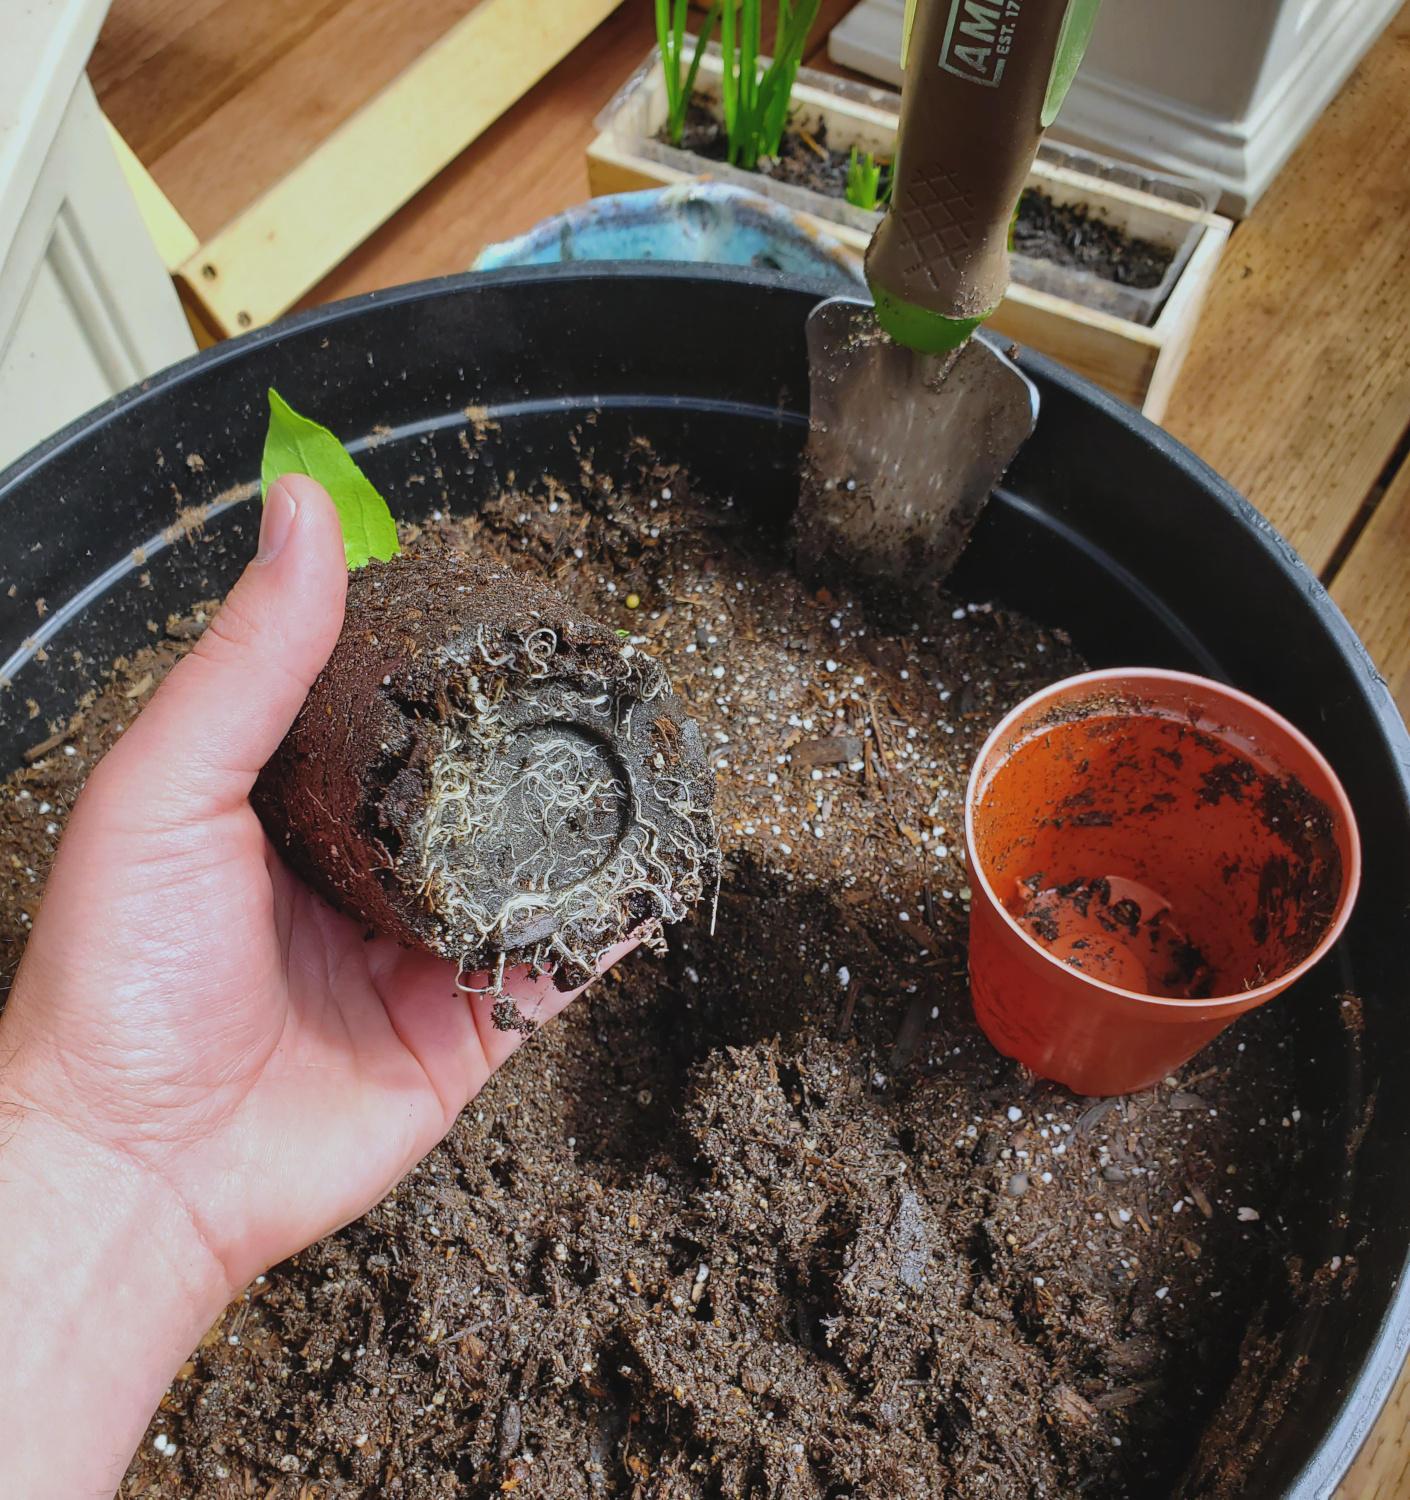 A sunflower seedling that grew too big for its pot, with the roots curling at the bottom